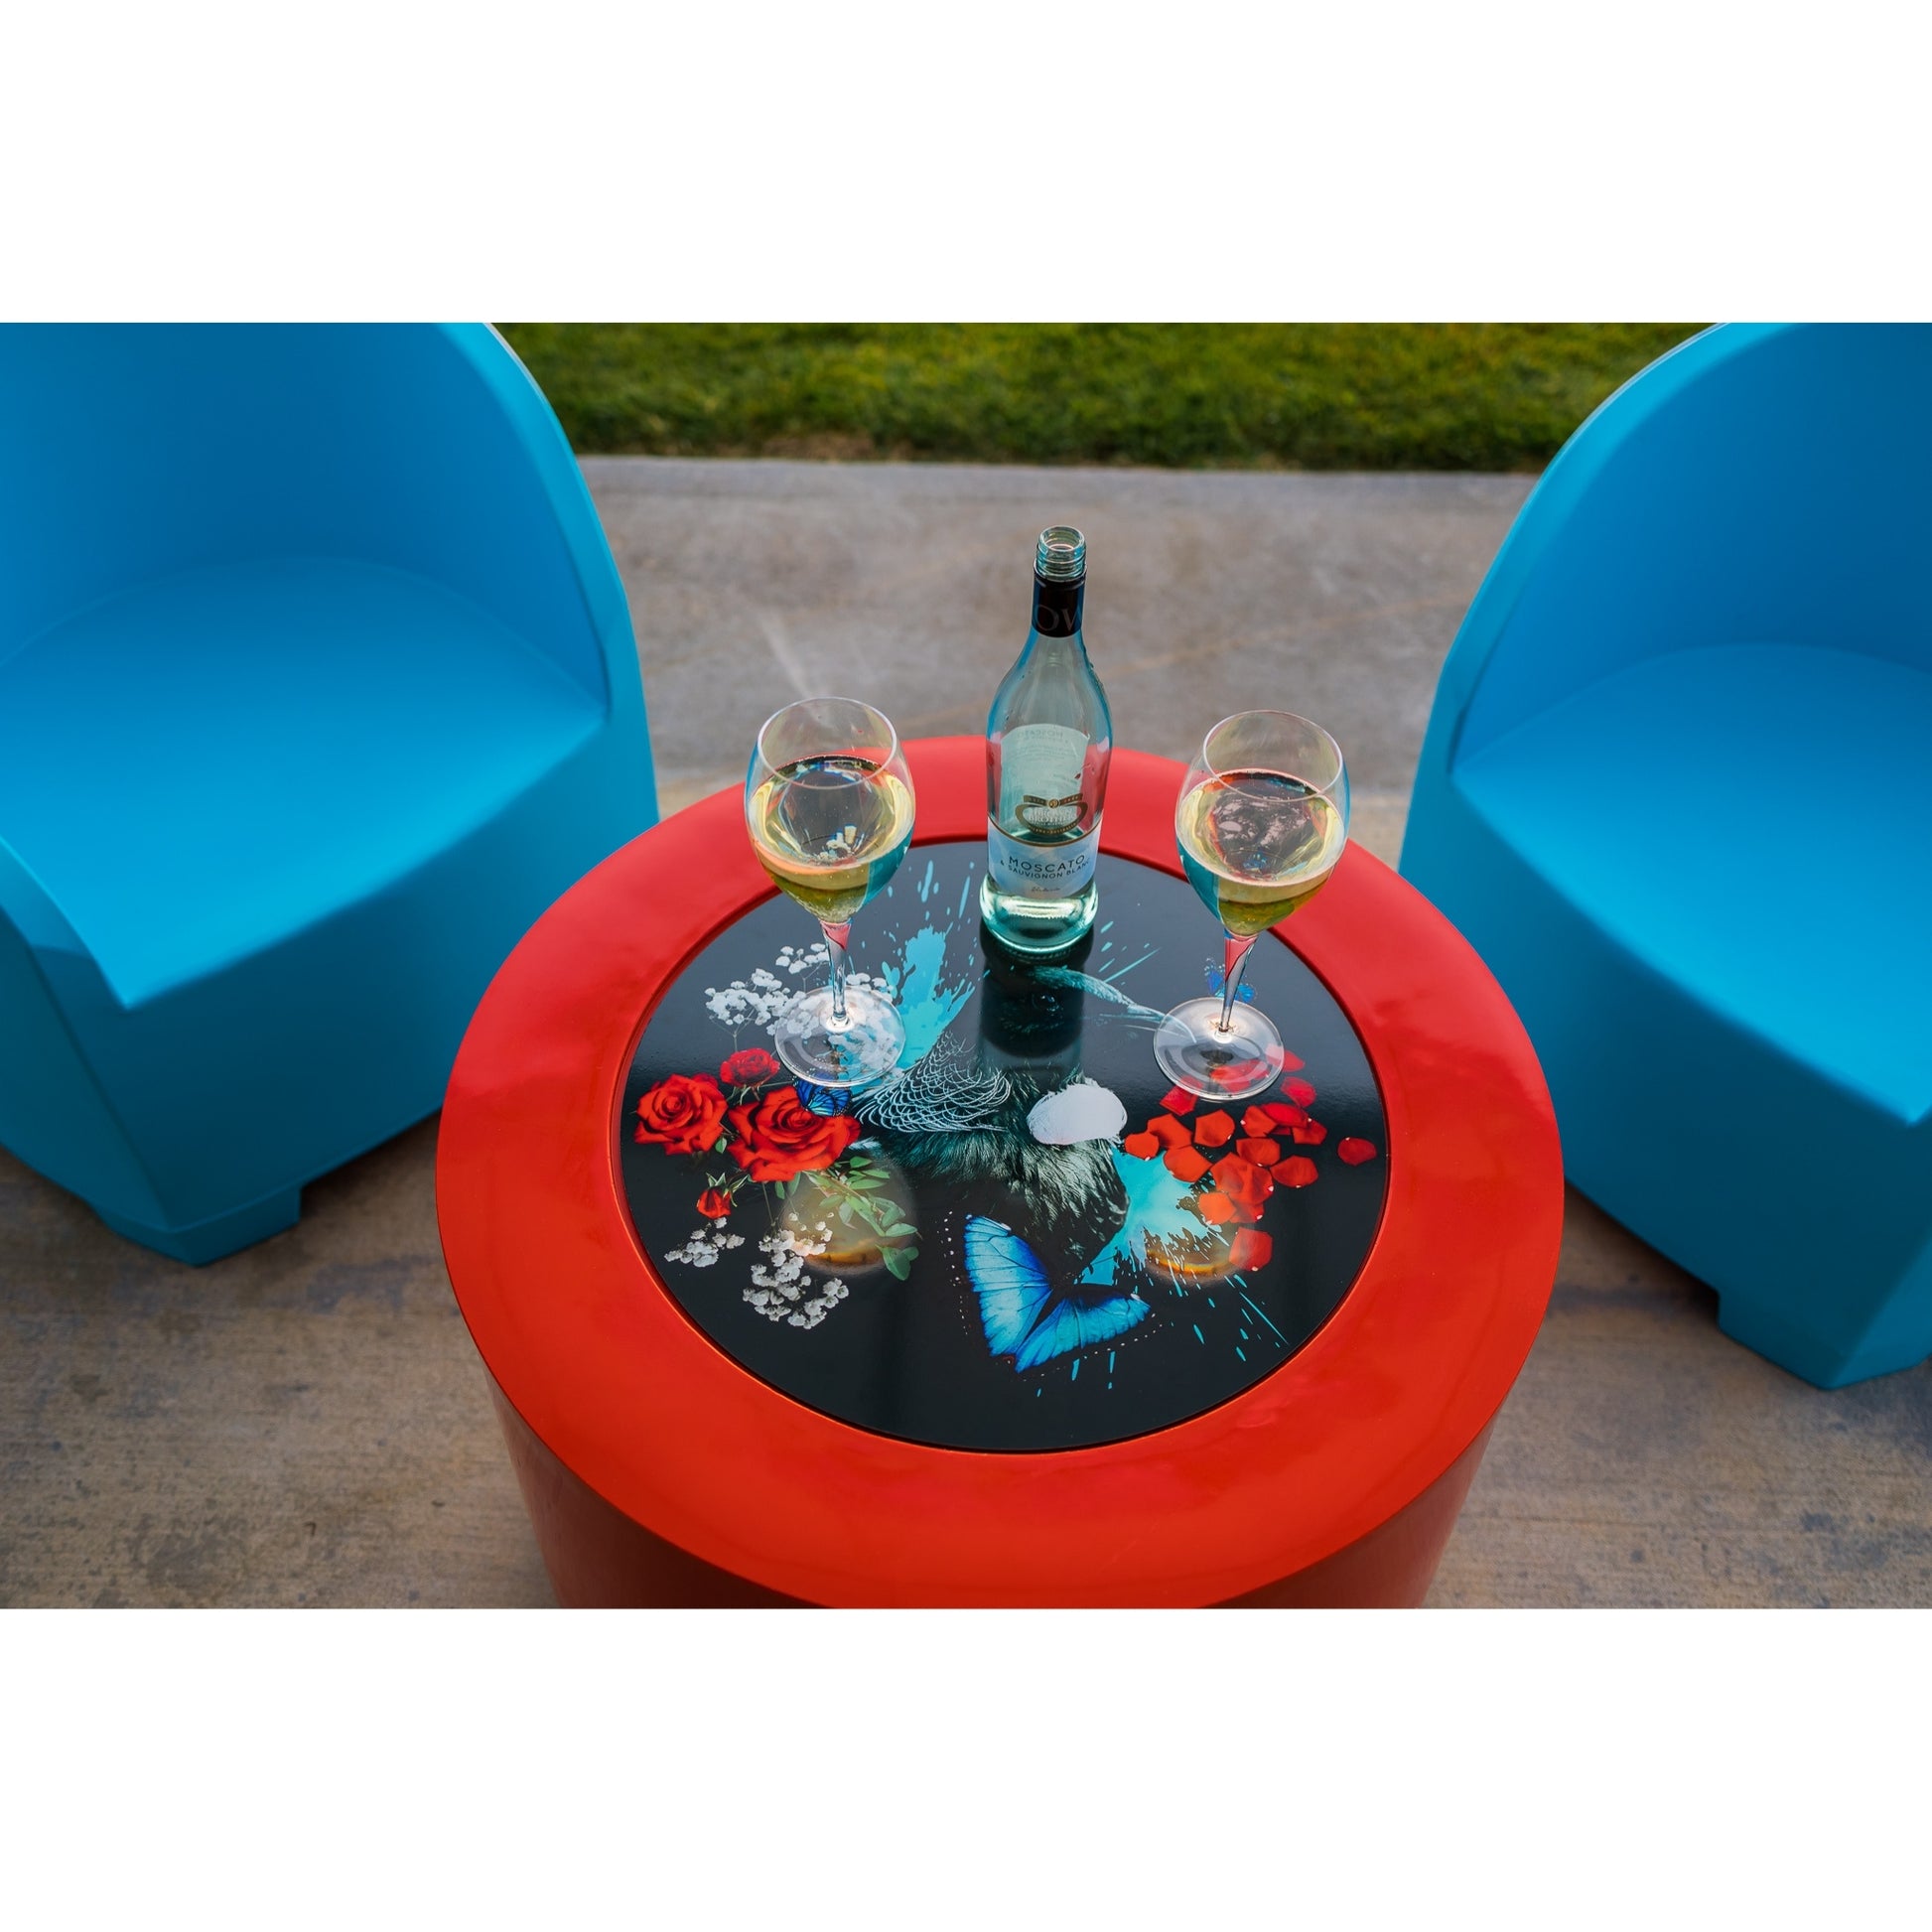 Two blue chairs and a red cylinder table on a patio area.